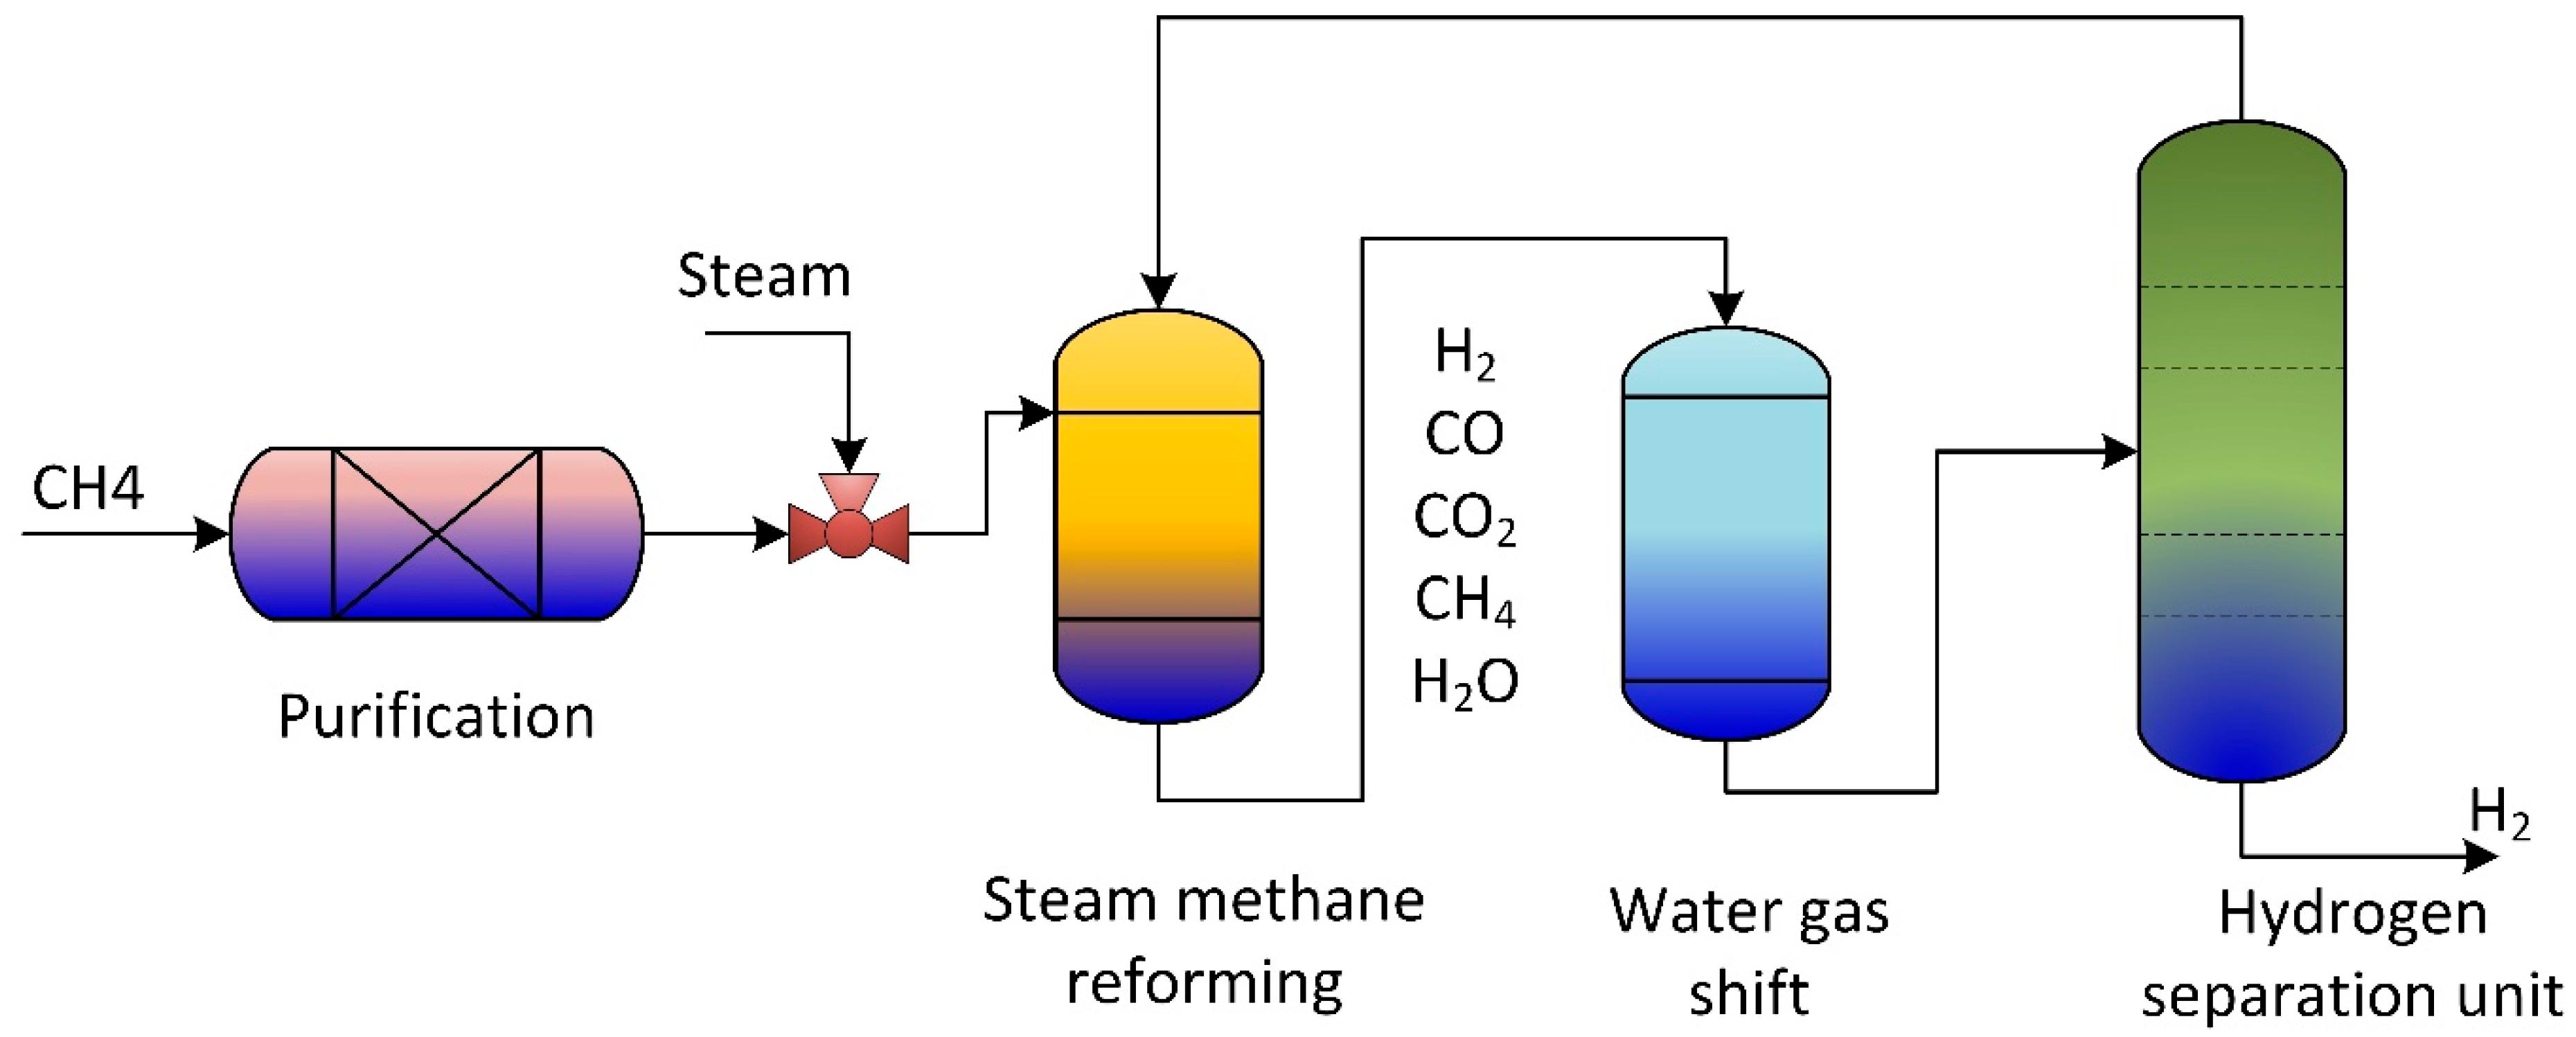 IJMS | Free Full-Text | A Review of the CFD Modeling of Hydrogen Production  in Catalytic Steam Reforming Reactors